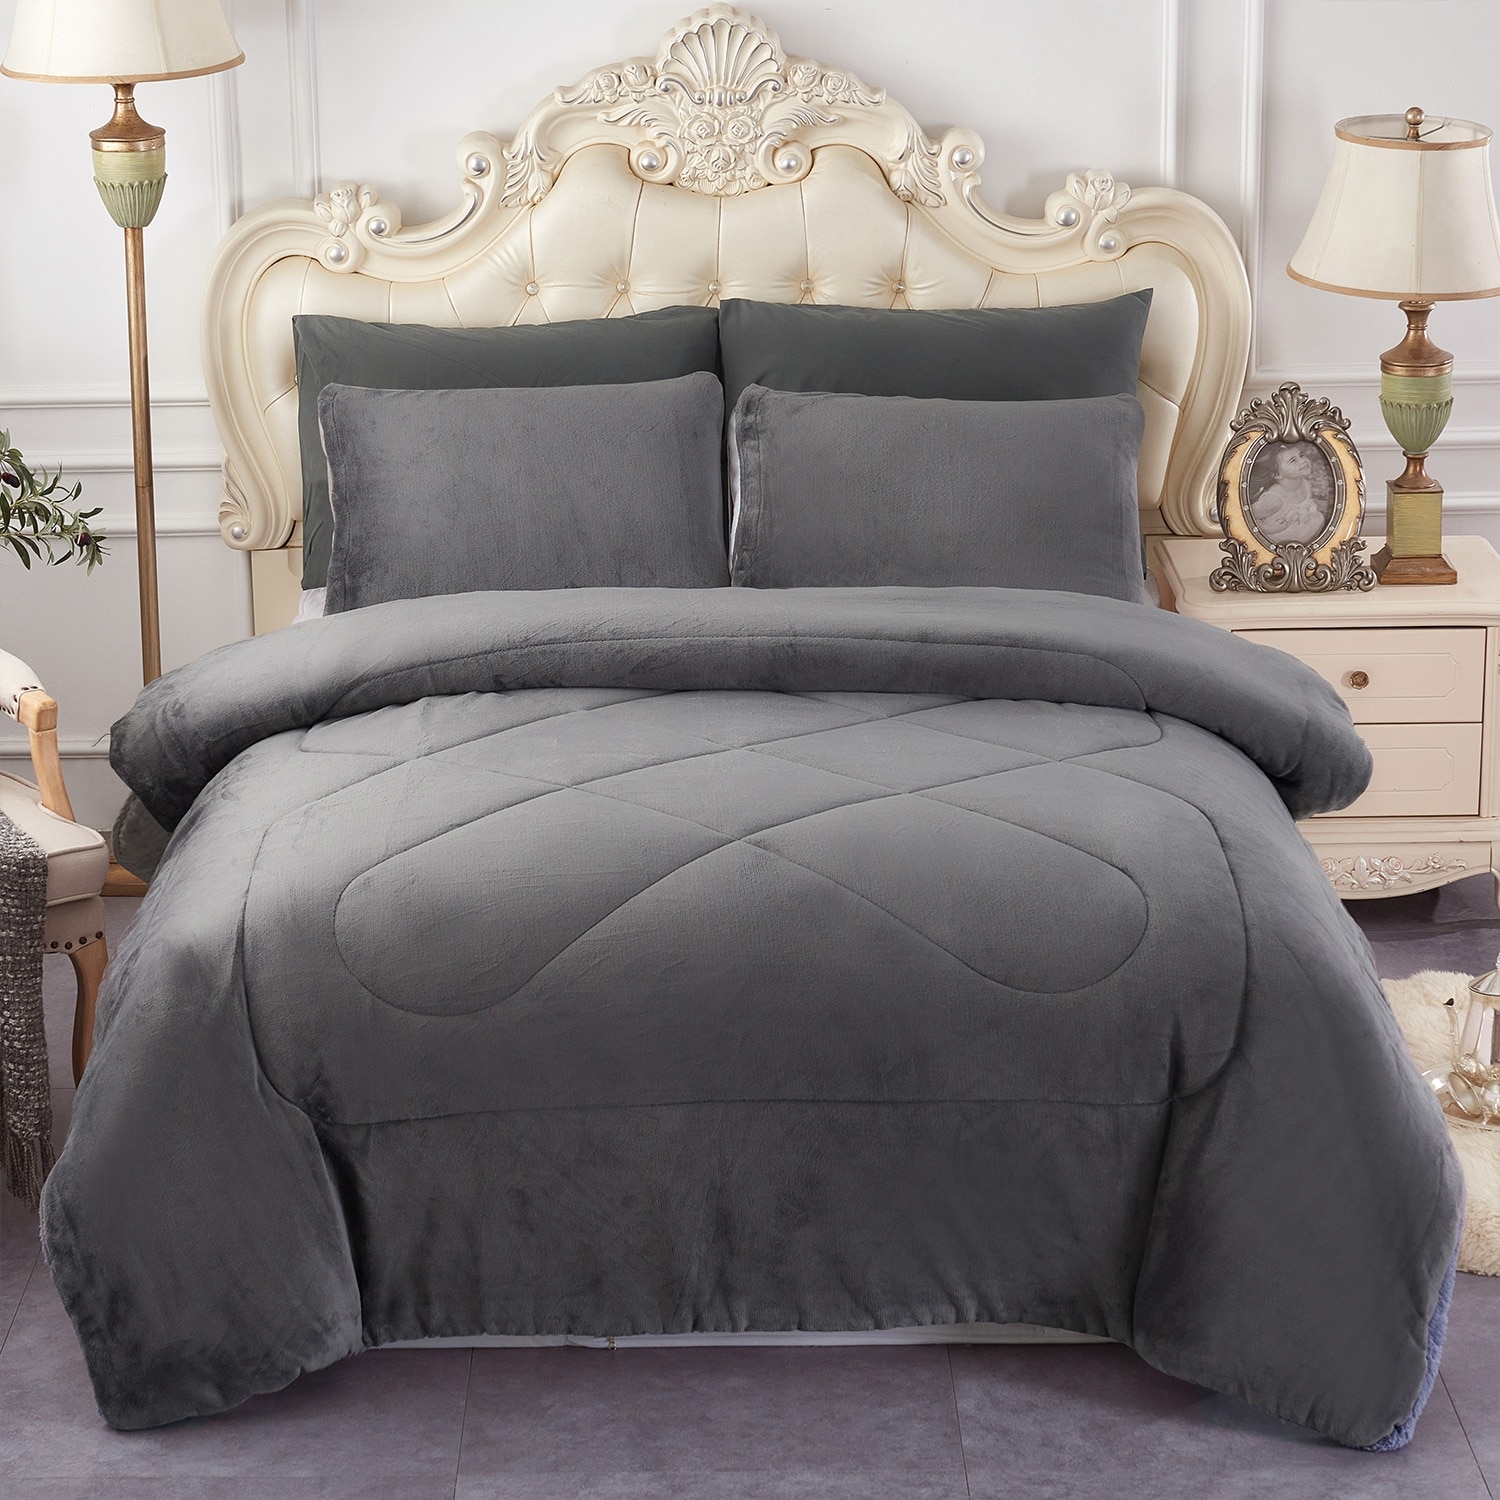 Bed Comforter Set Sherpa Ultra Soft Micromink Plush Gray Queen Size 3 Piece Kit 